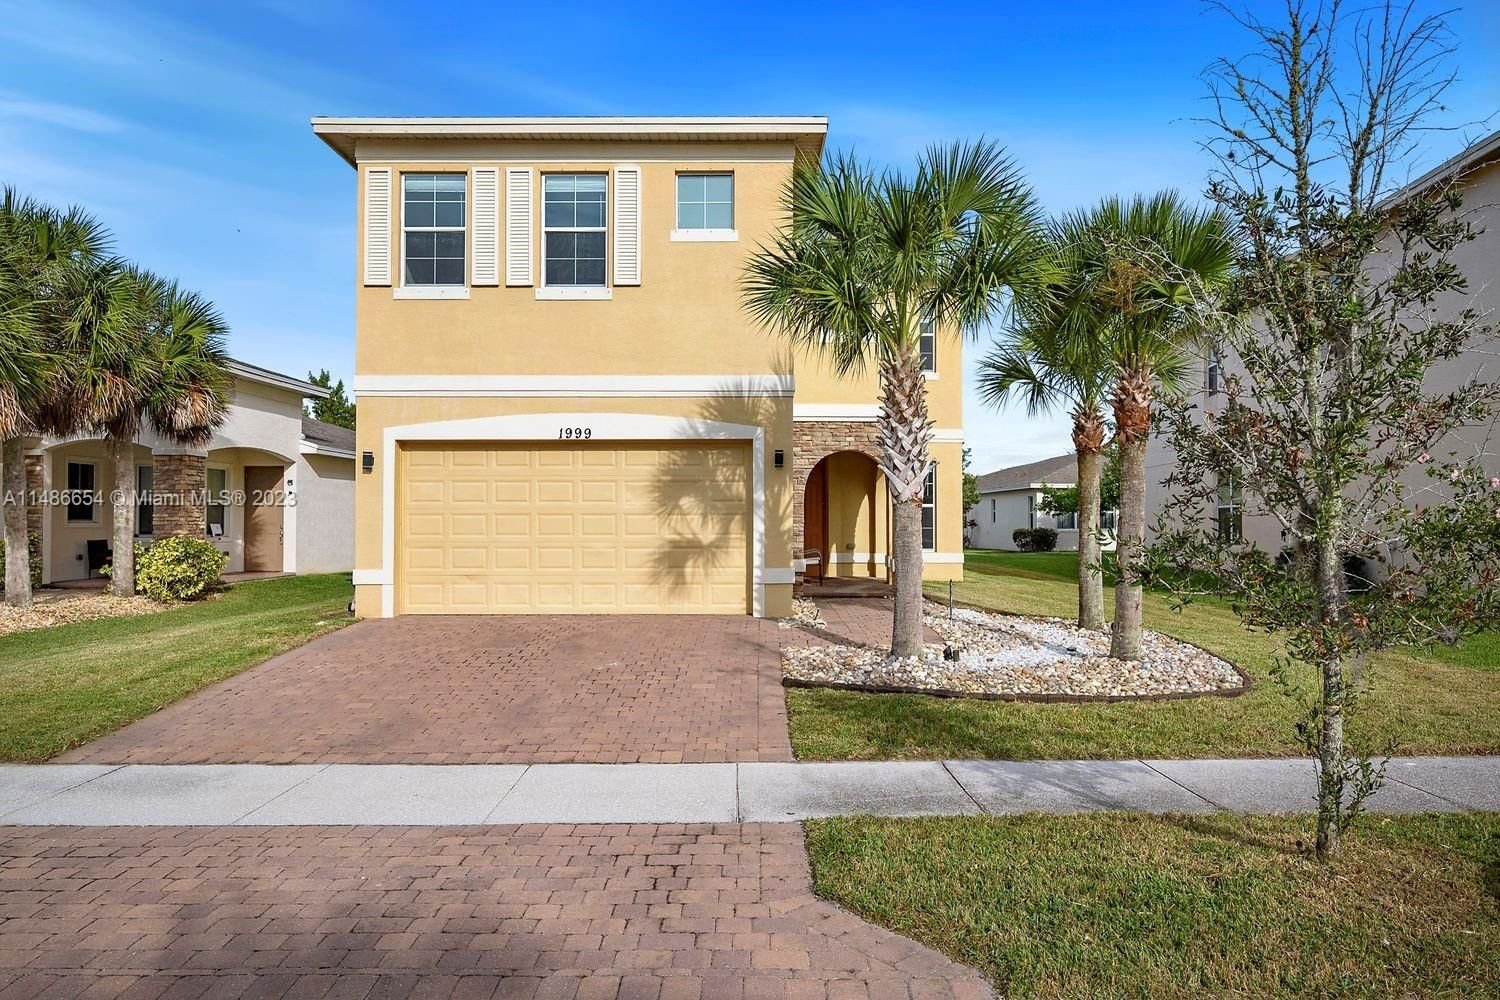 Real estate property located at 1999 Cataluna Cir, St Lucie County, VIZCAYA FALLS PLAT 2, Port St. Lucie, FL